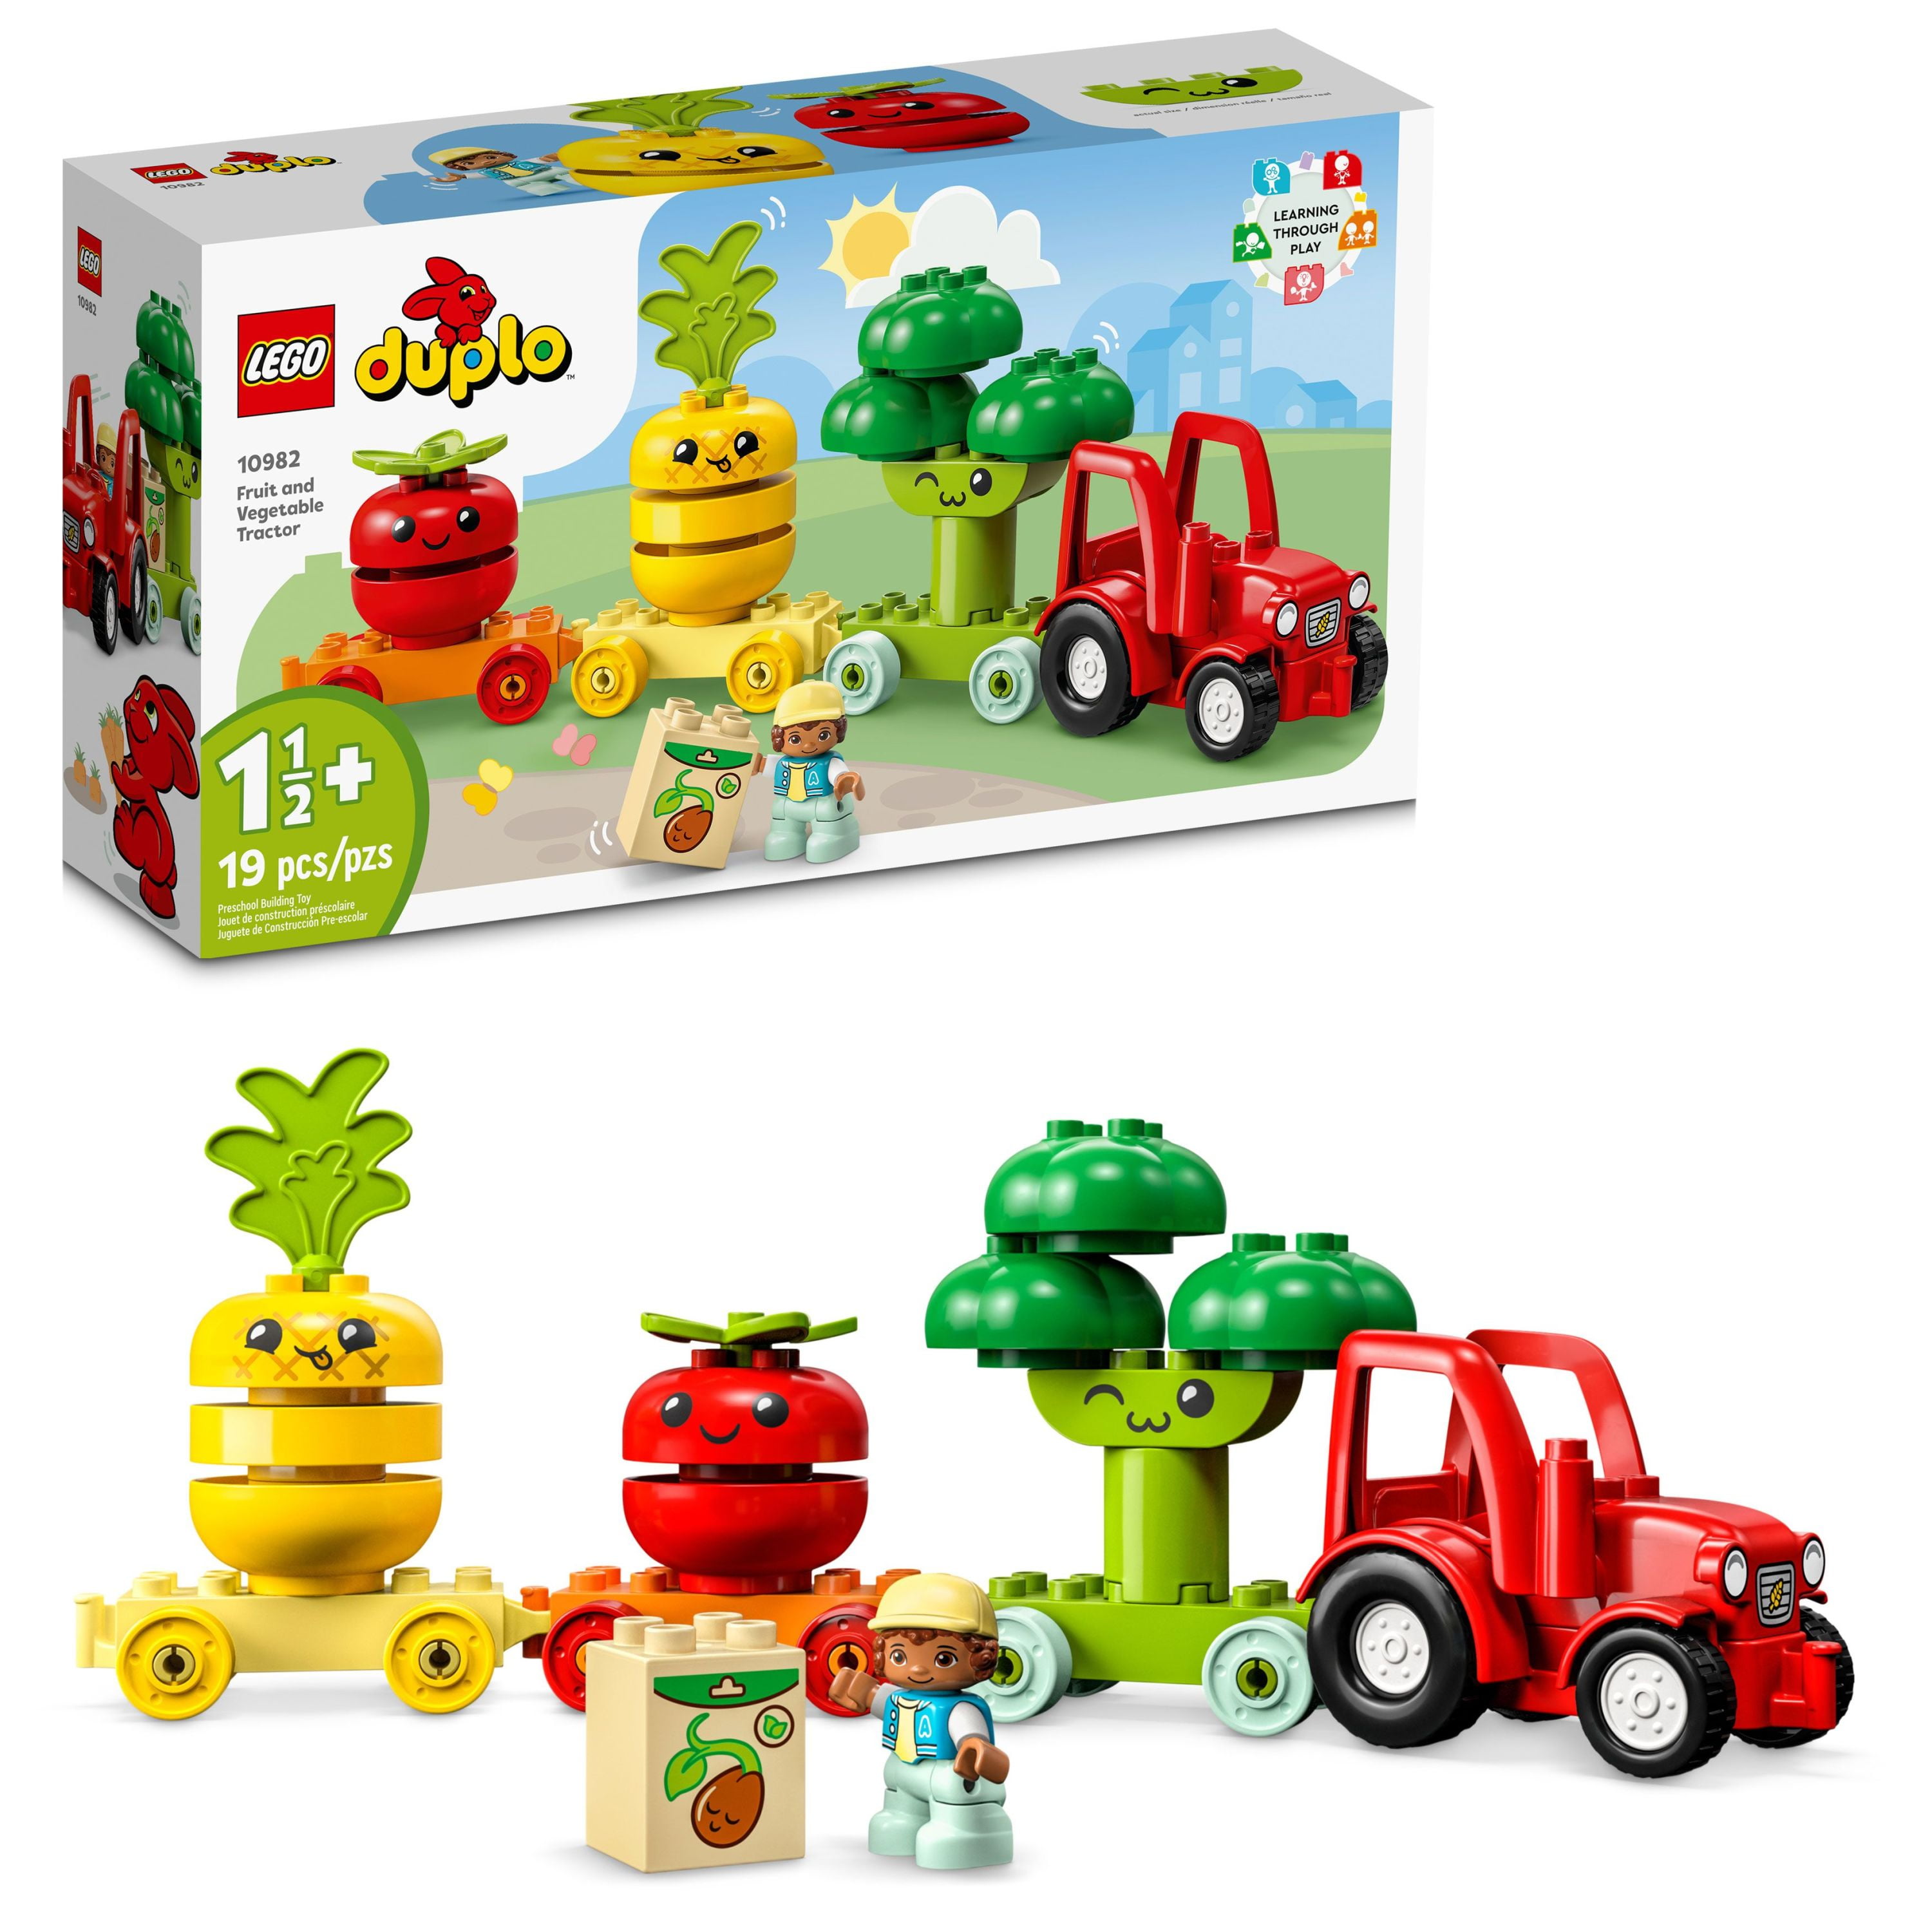 LEGO DUPLO My Fruit and Vegetable Tractor Toy 10982, Stacking and Color Sorting Toys for Babies and Toddlers ages 1 .5 - 3 Years Old, Educational Early Set Walmart.com